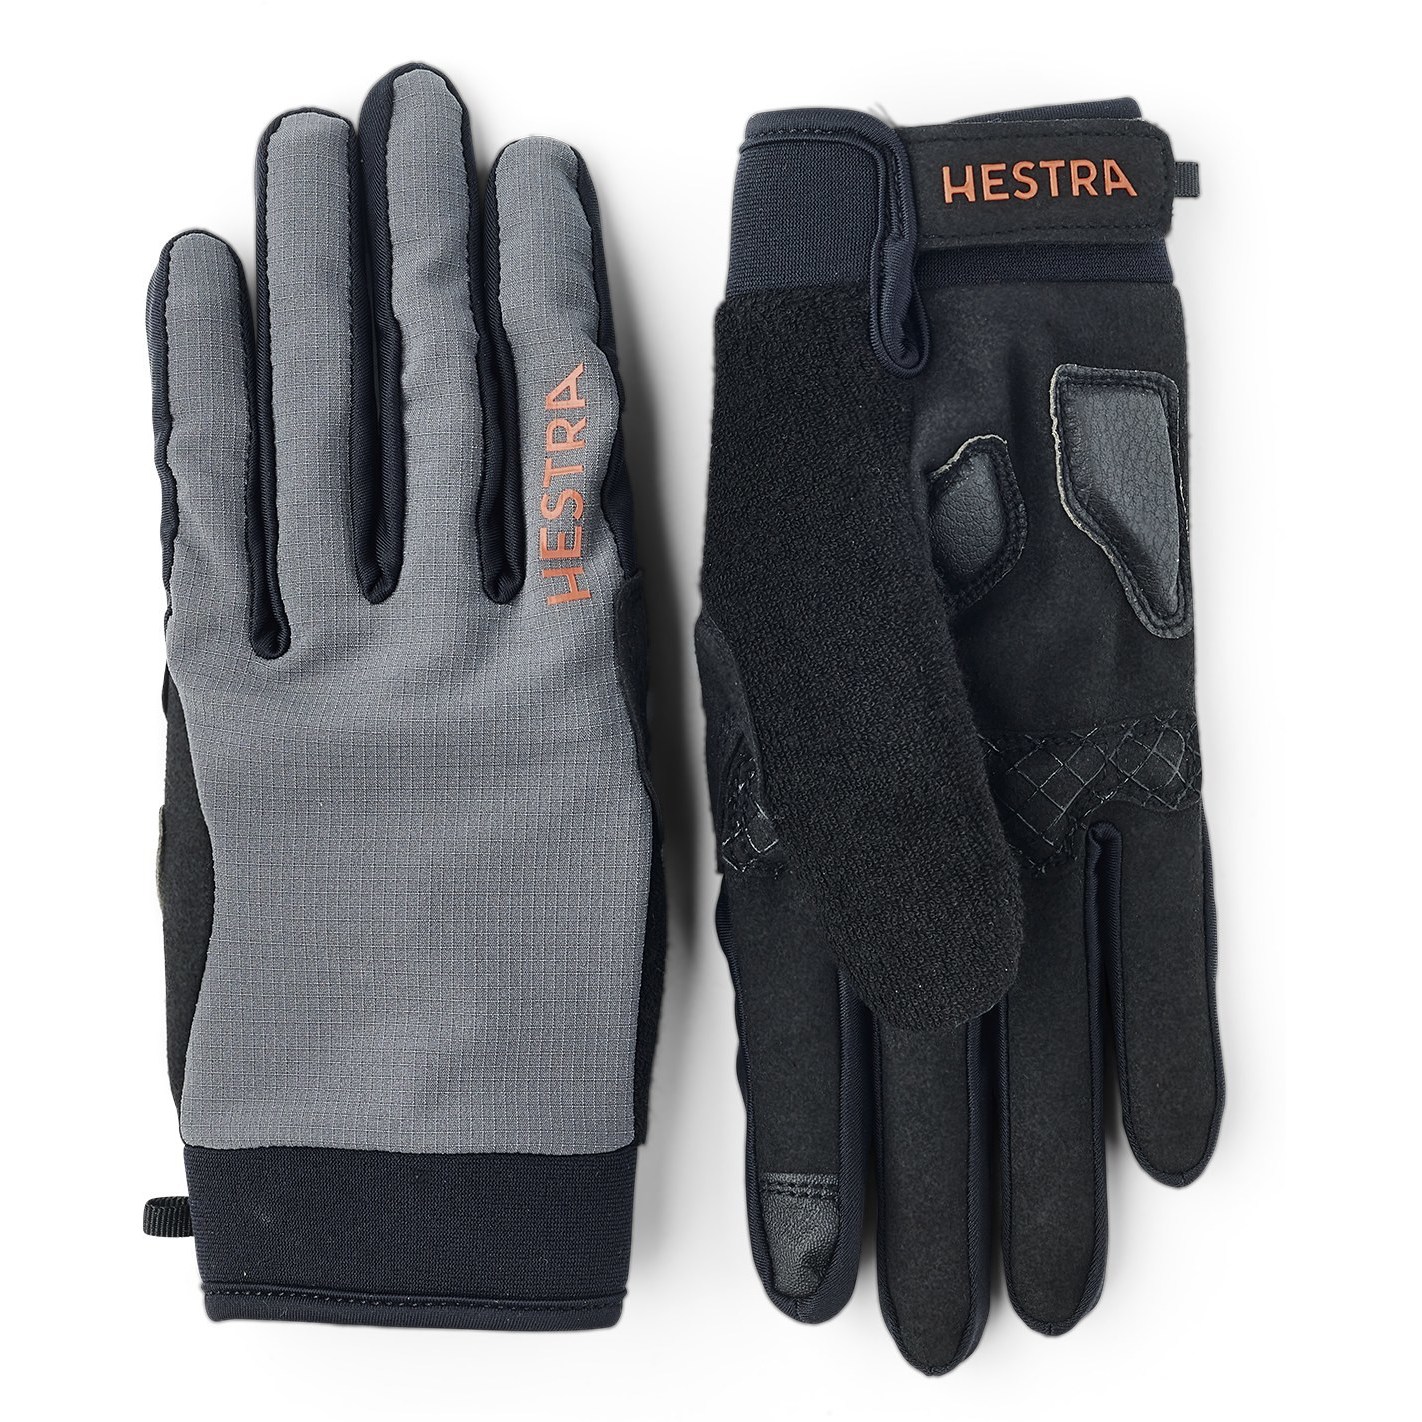 Picture of Hestra Bike Guard Long - 5 Finger Gloves - charocoal